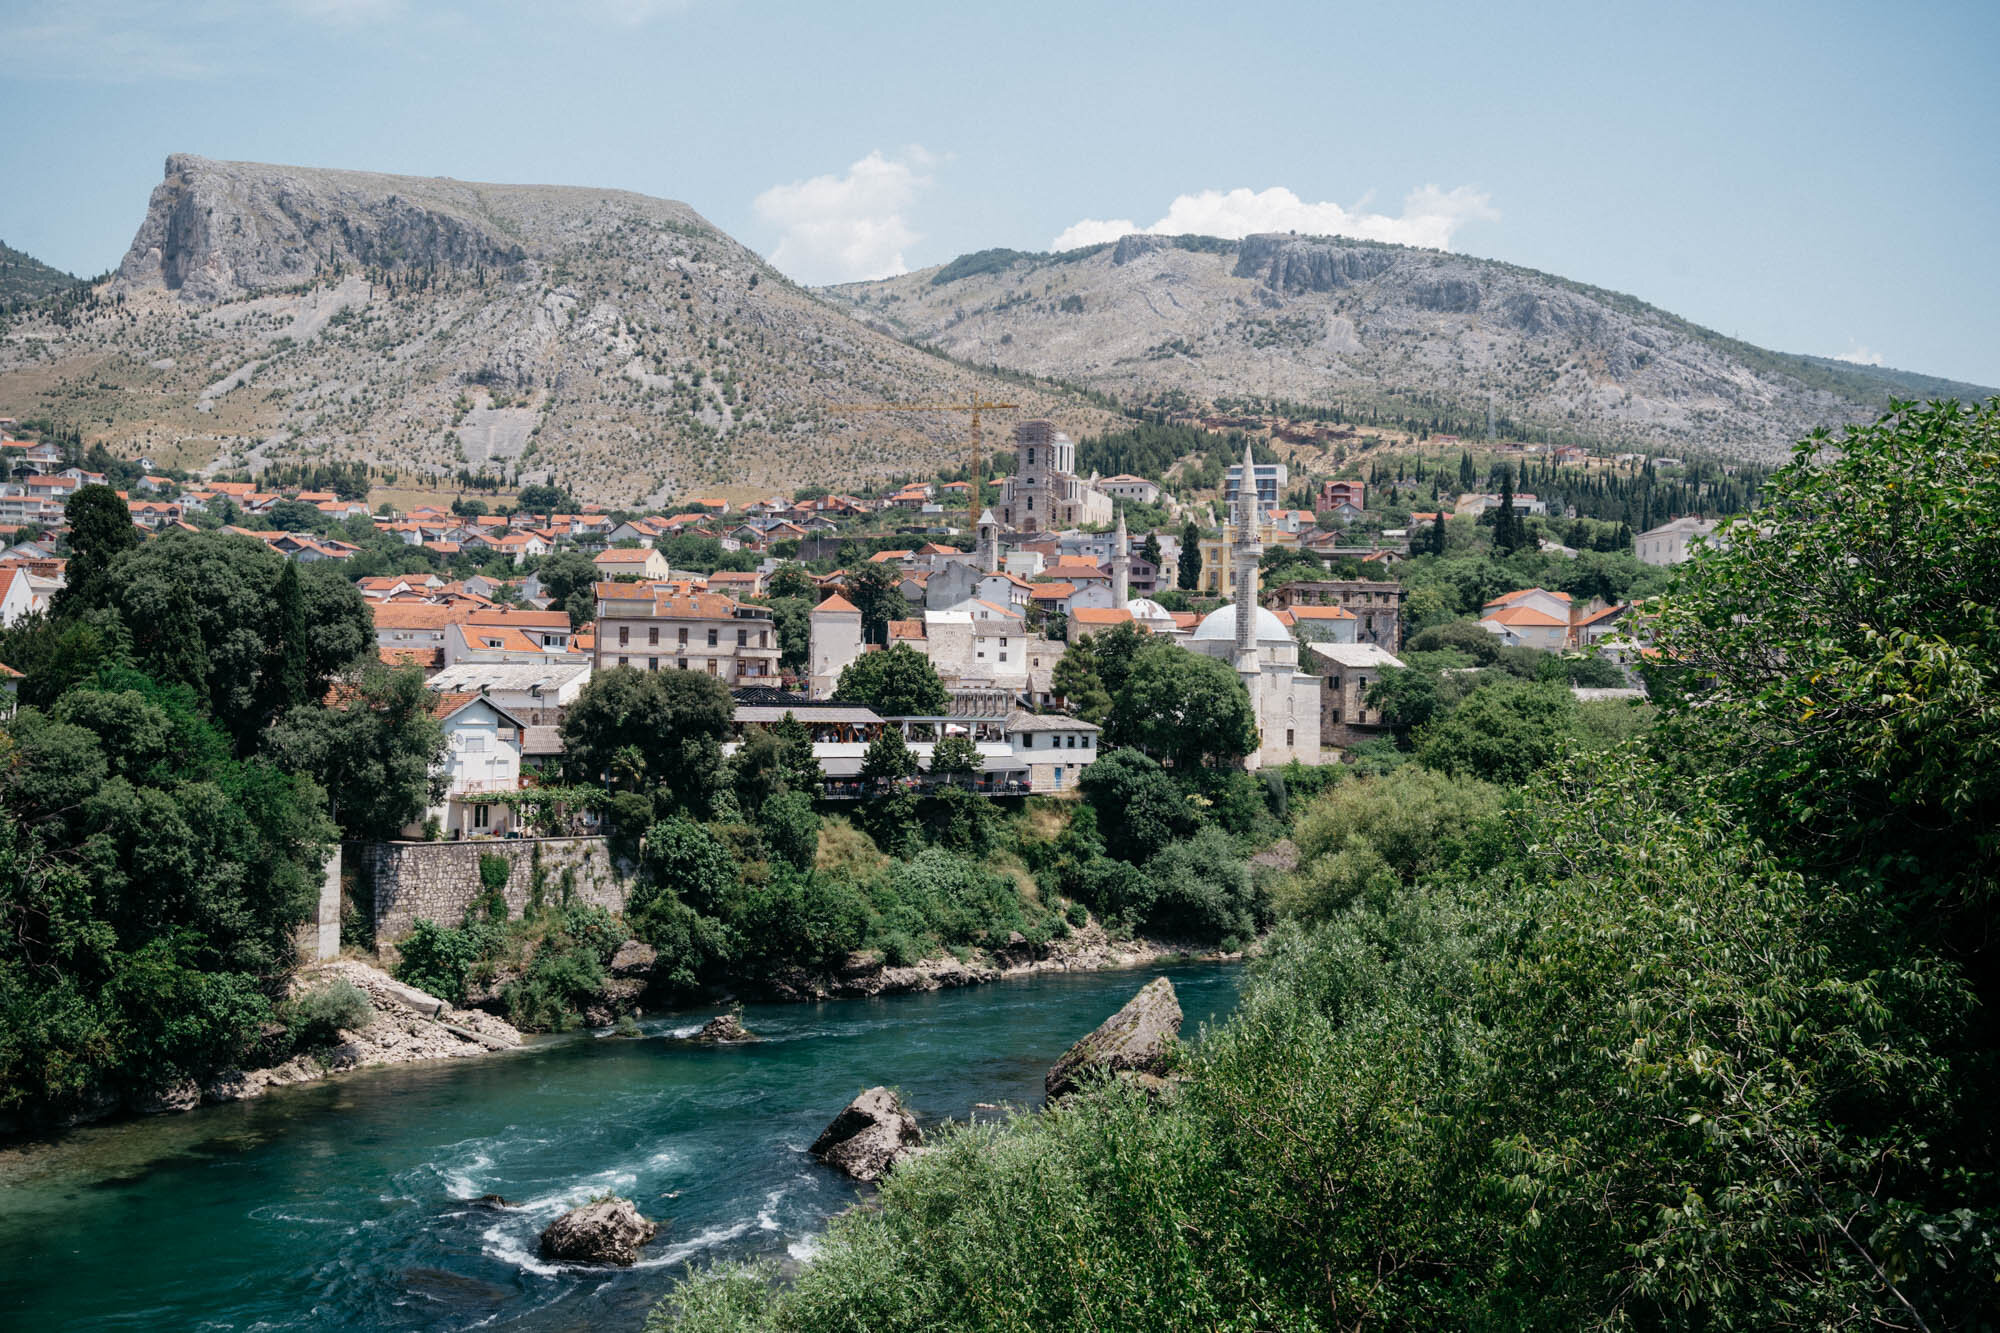  Mostar on the Neretva River. The city is home to a variety of different mosques and churches. Top centre you can see a new cathedral is under construction. 